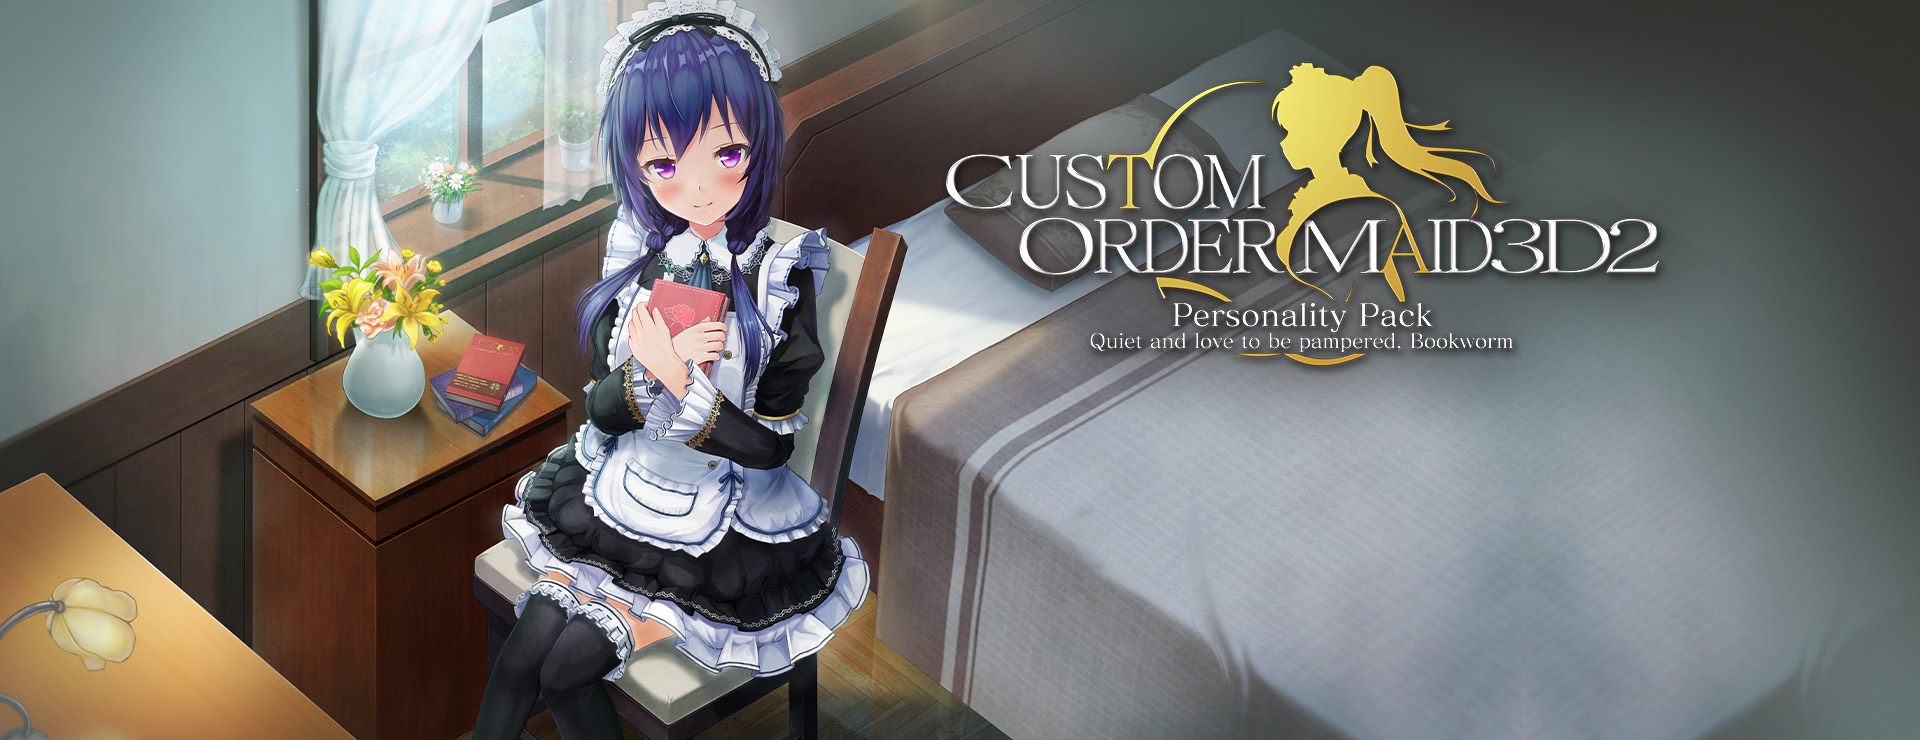 Custom Order Maid 3D2 - Quiet and Love to be Pampered Bookworm DLC - Simulation Spiel